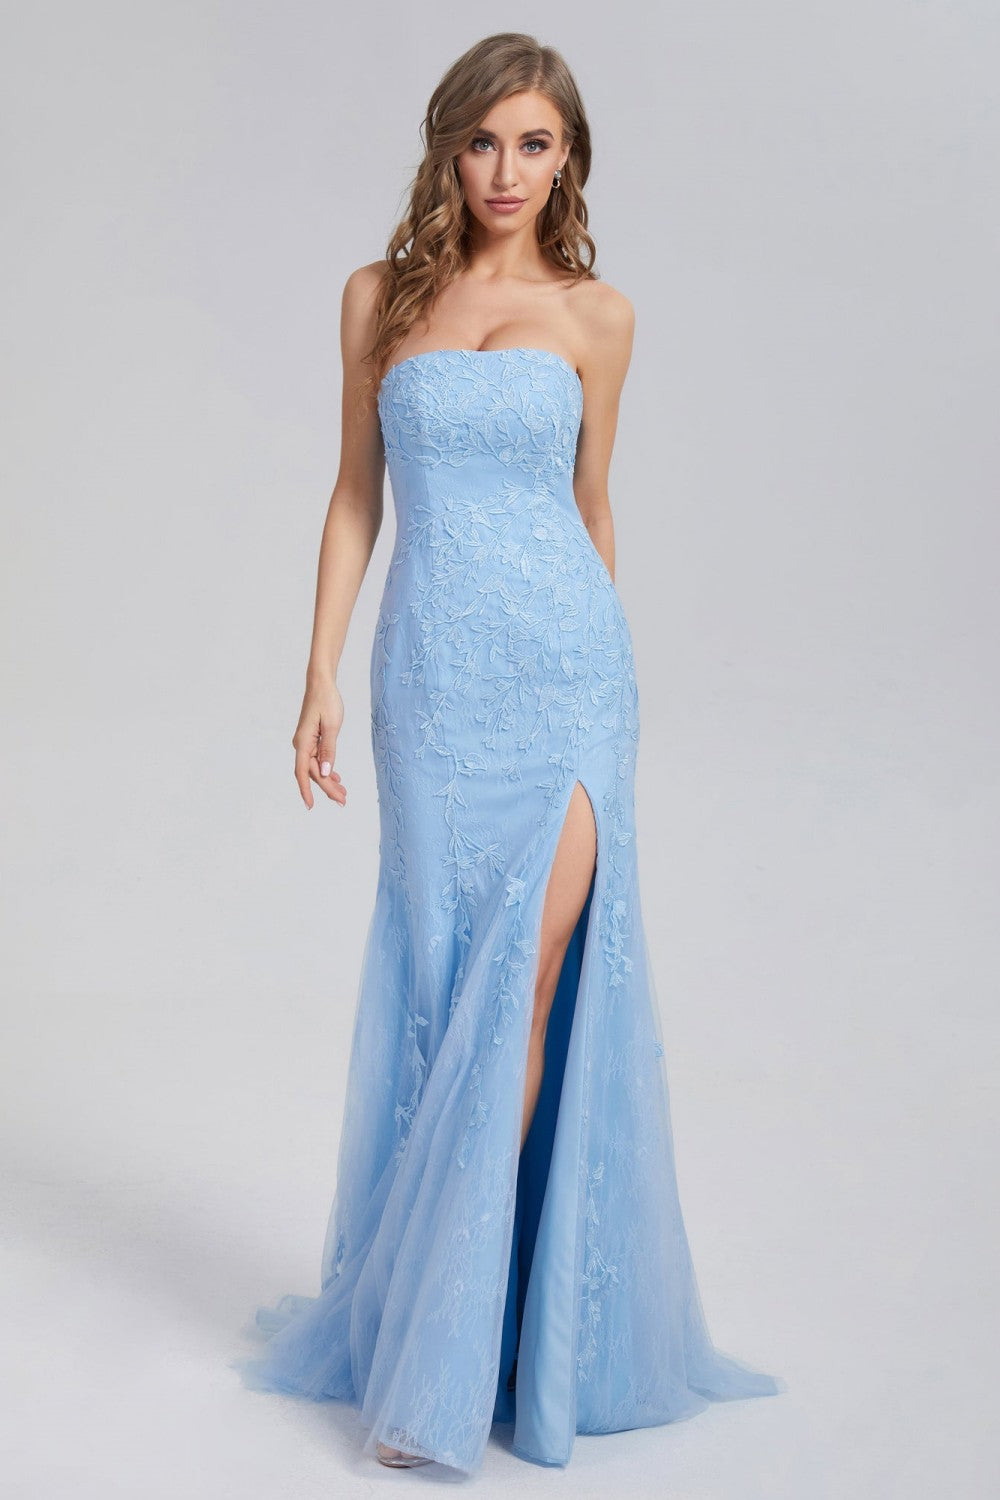 dressimeMermaid Strapless Applique Long Prom Dresses With Slit 